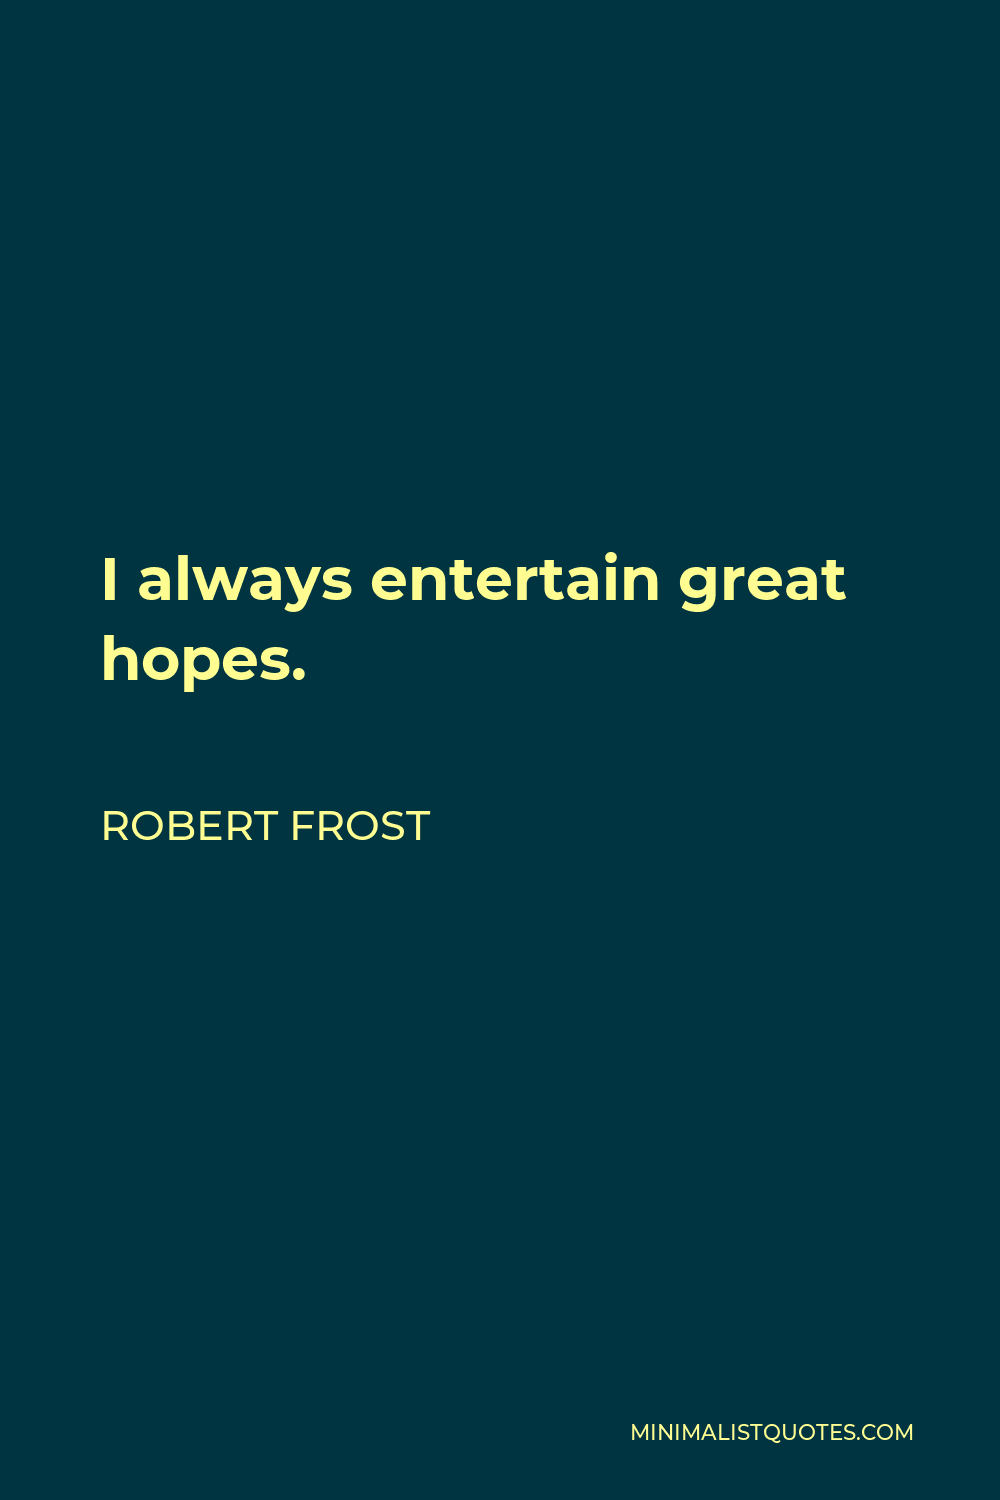 Robert Frost Quote - I always entertain great hopes.